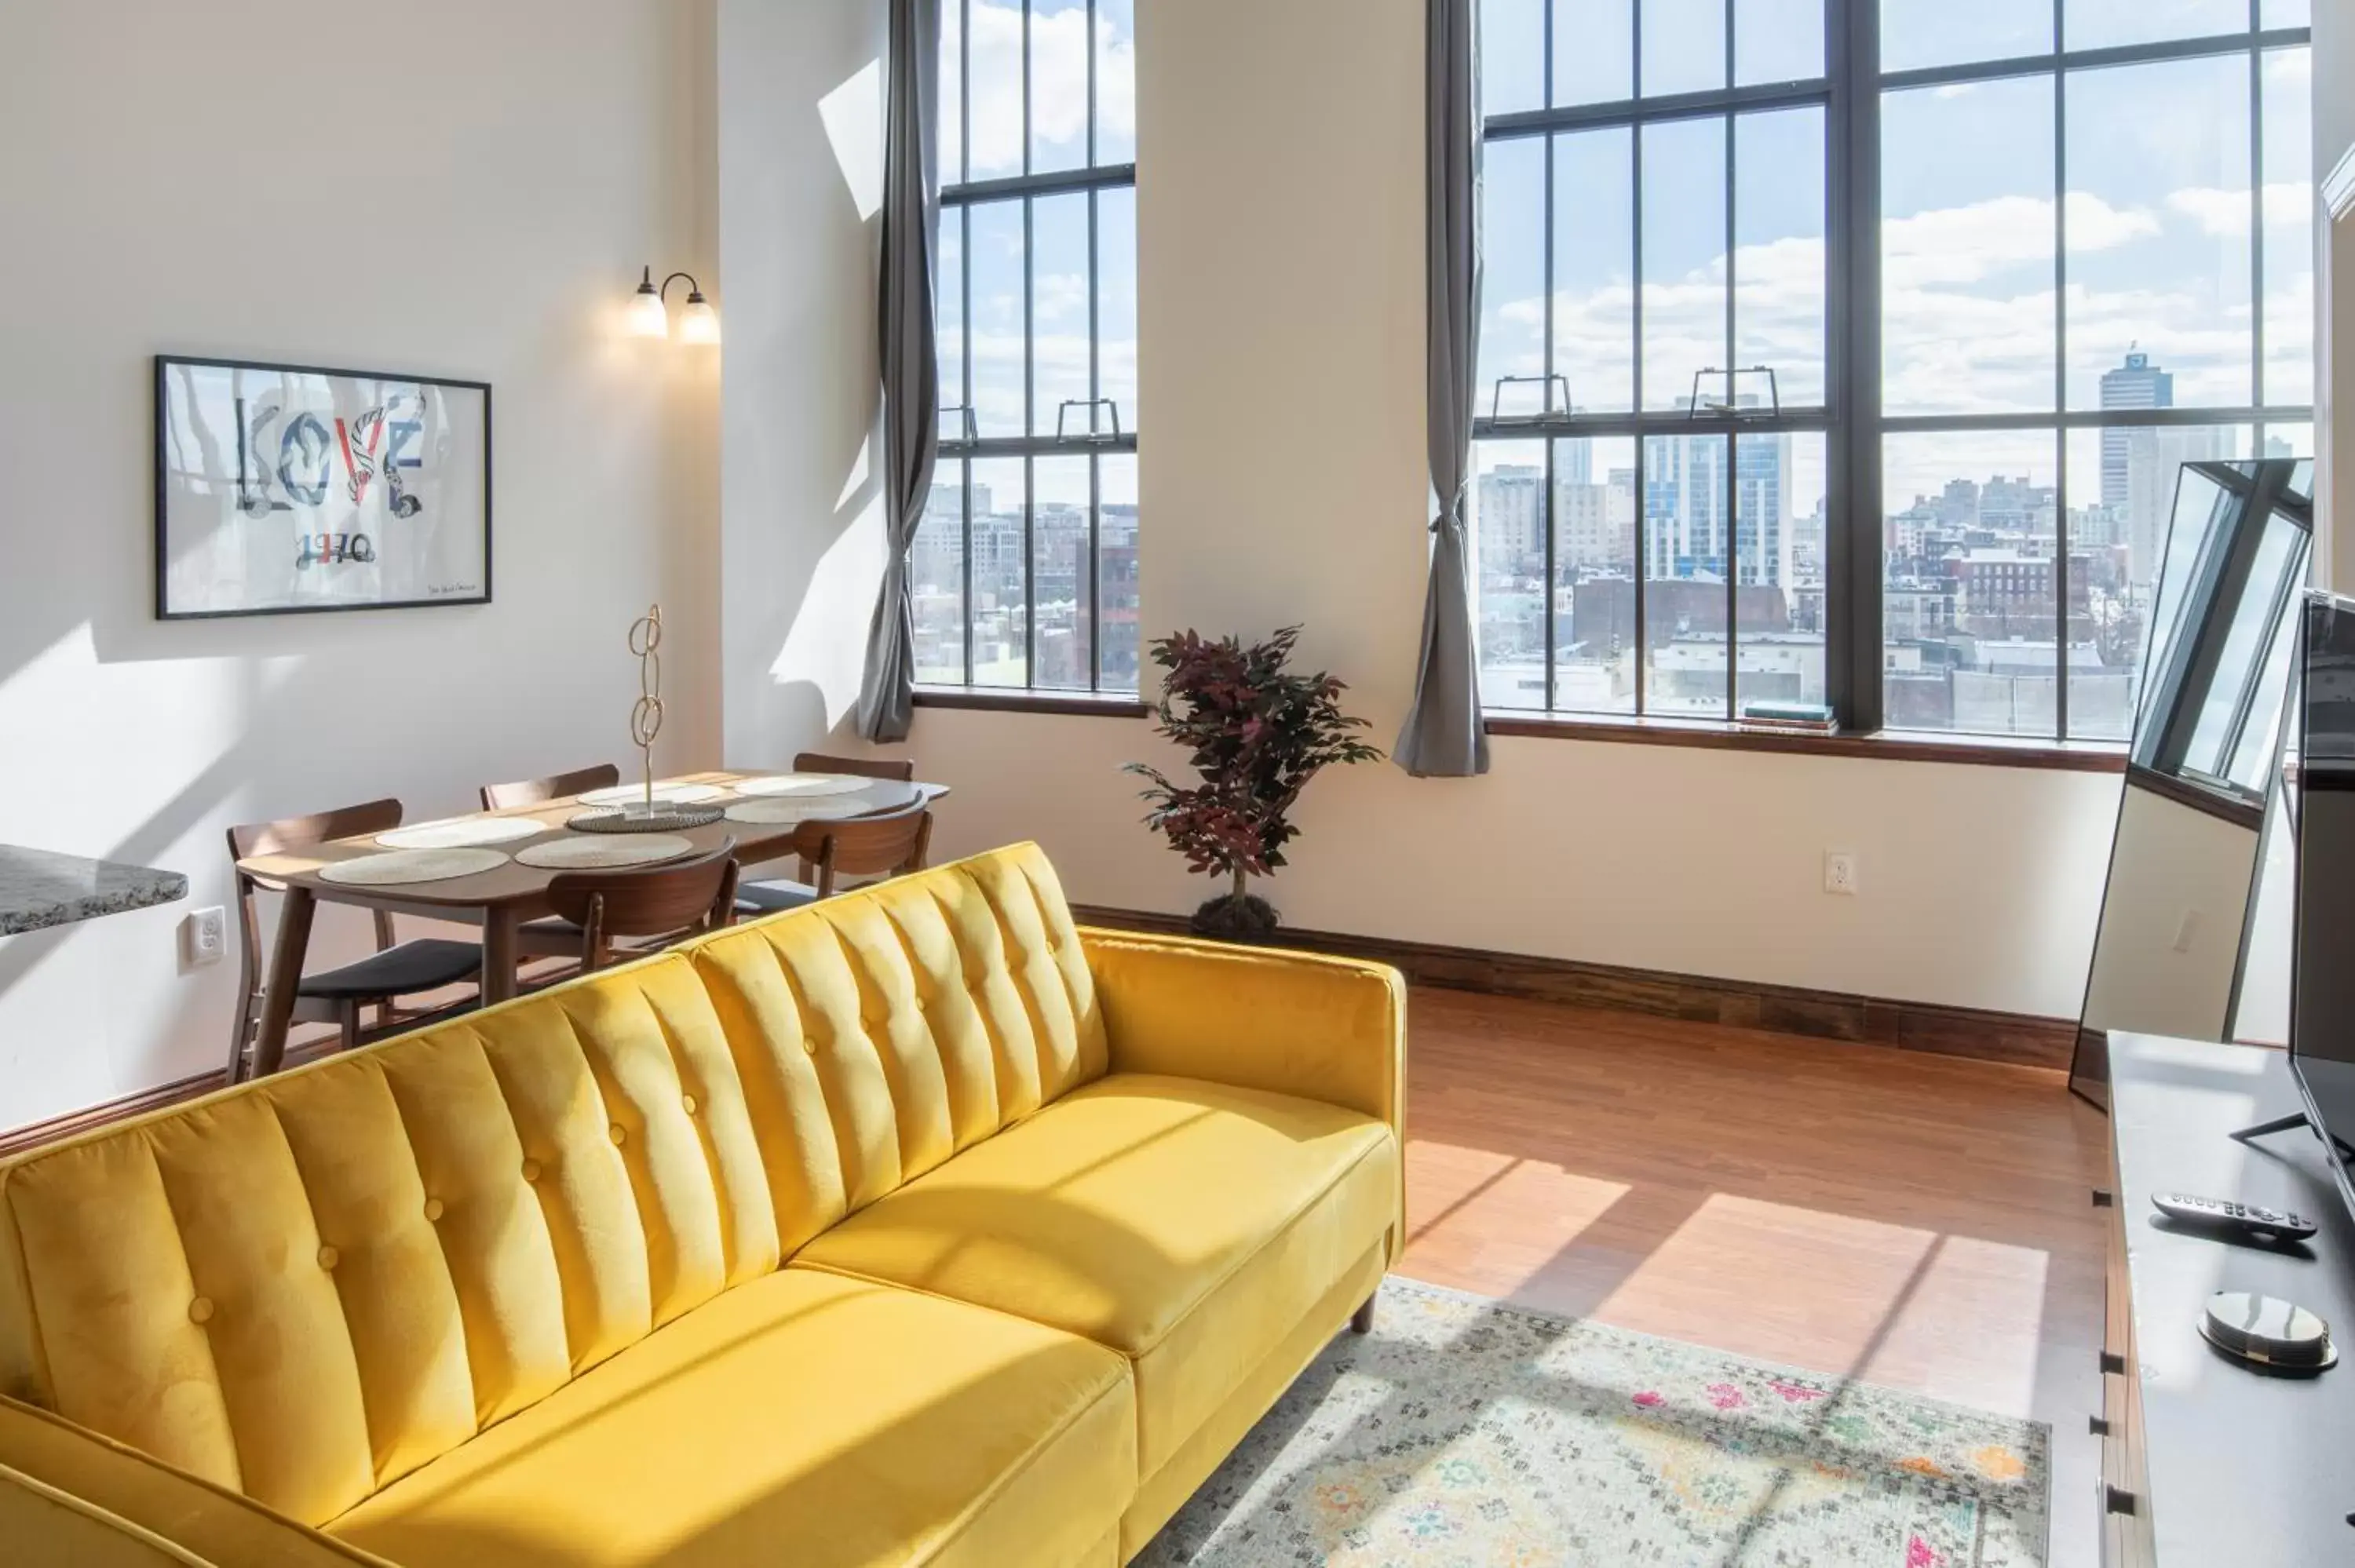 Penthouse Apartment in Sosuite at Independence Lofts - Callowhill